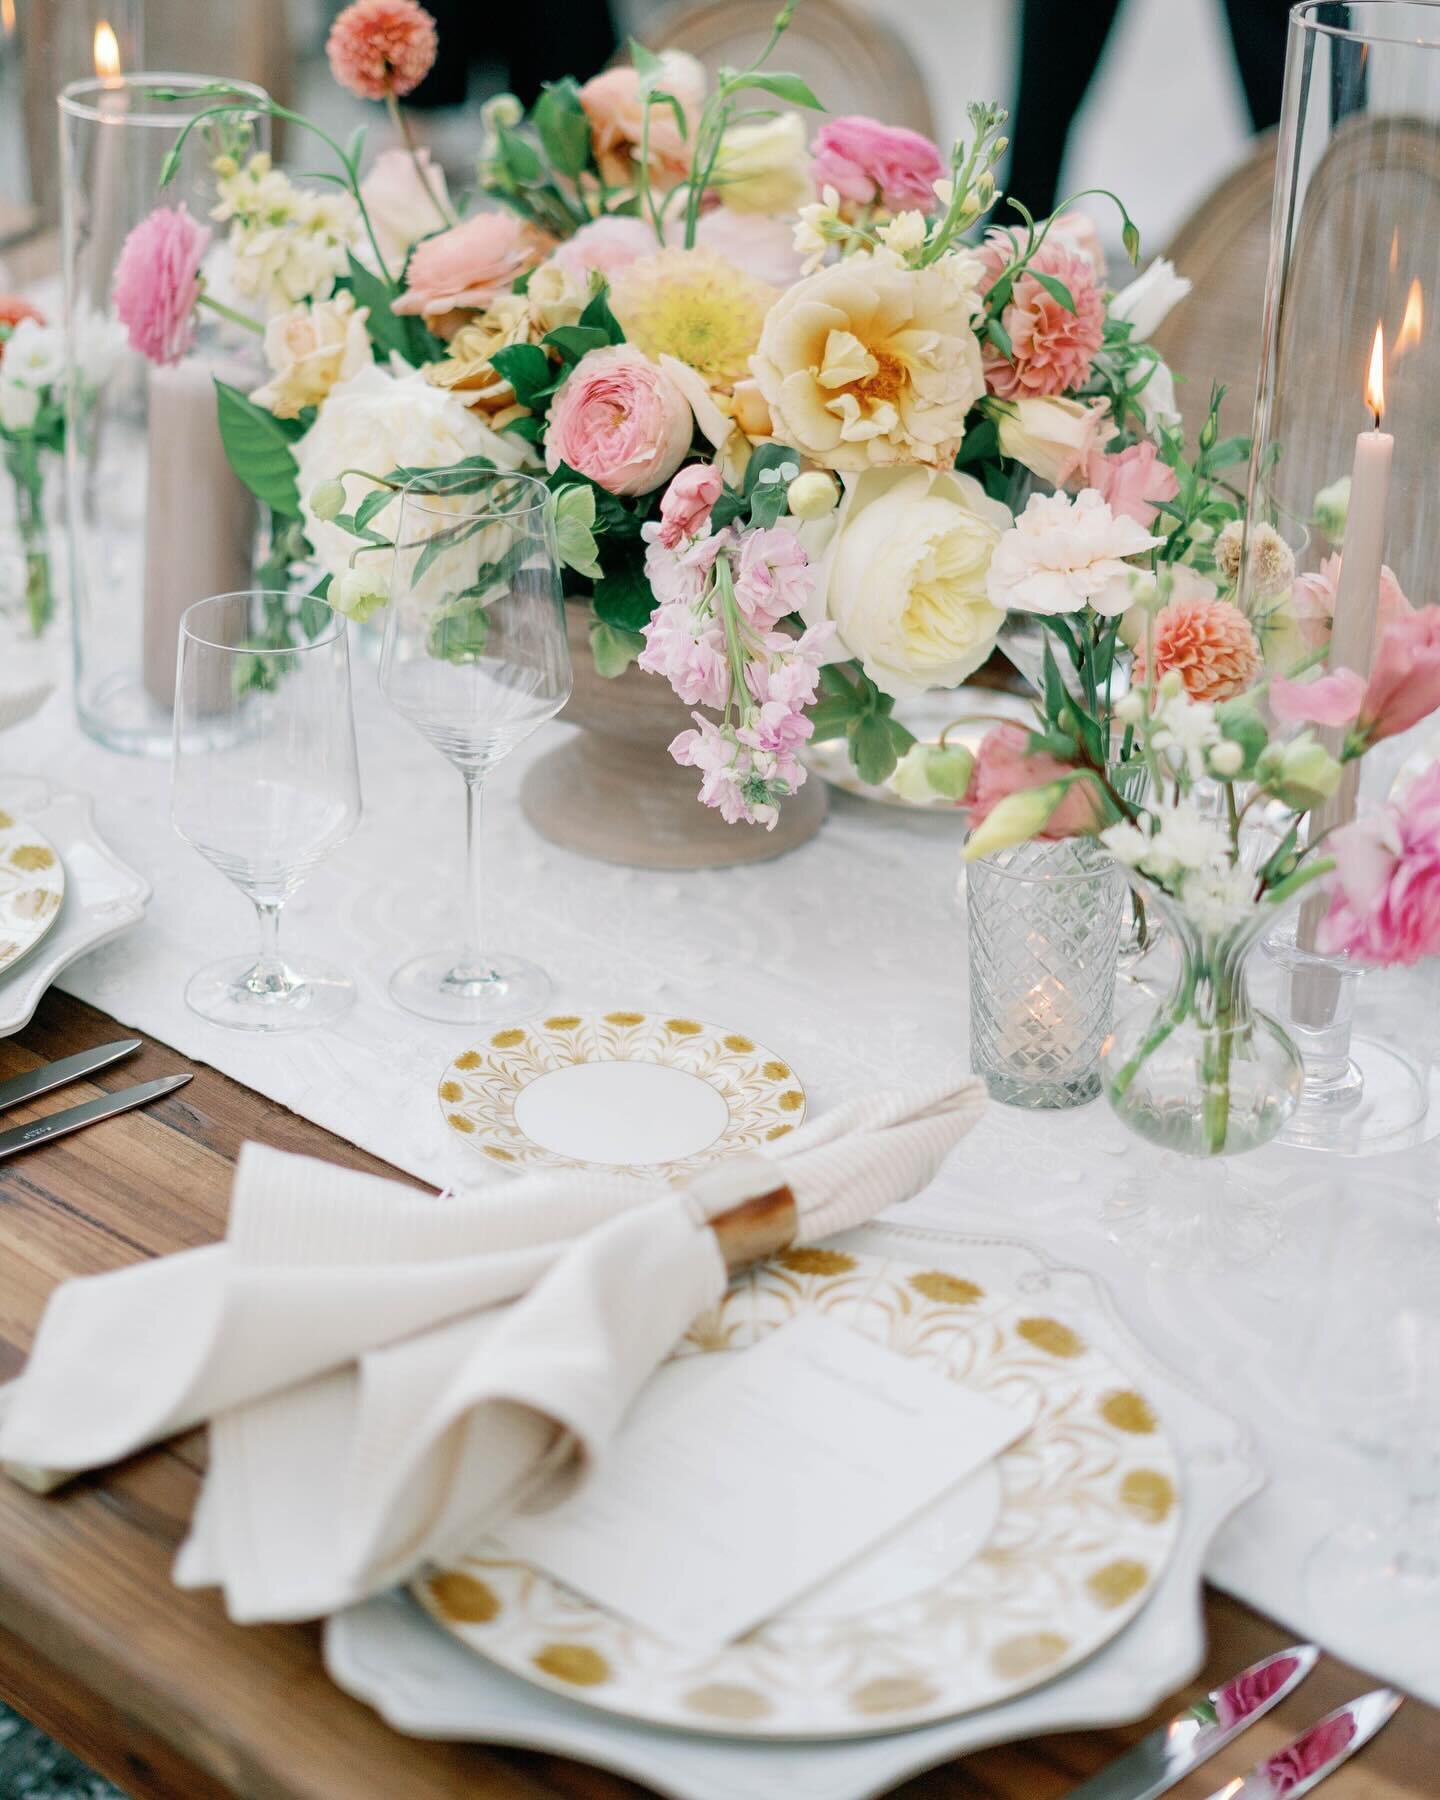 The beauty that was this head table- horn flatware, sandstone pillars, dahlia season- couldn&rsquo;t ask for a better combo! 

.
.
.
Photo: @ashleyspanglerphoto 
Floral: @stephaniegibbsevents 
Rentals: @snyderevents  @curatedeventscharleston  @cheers